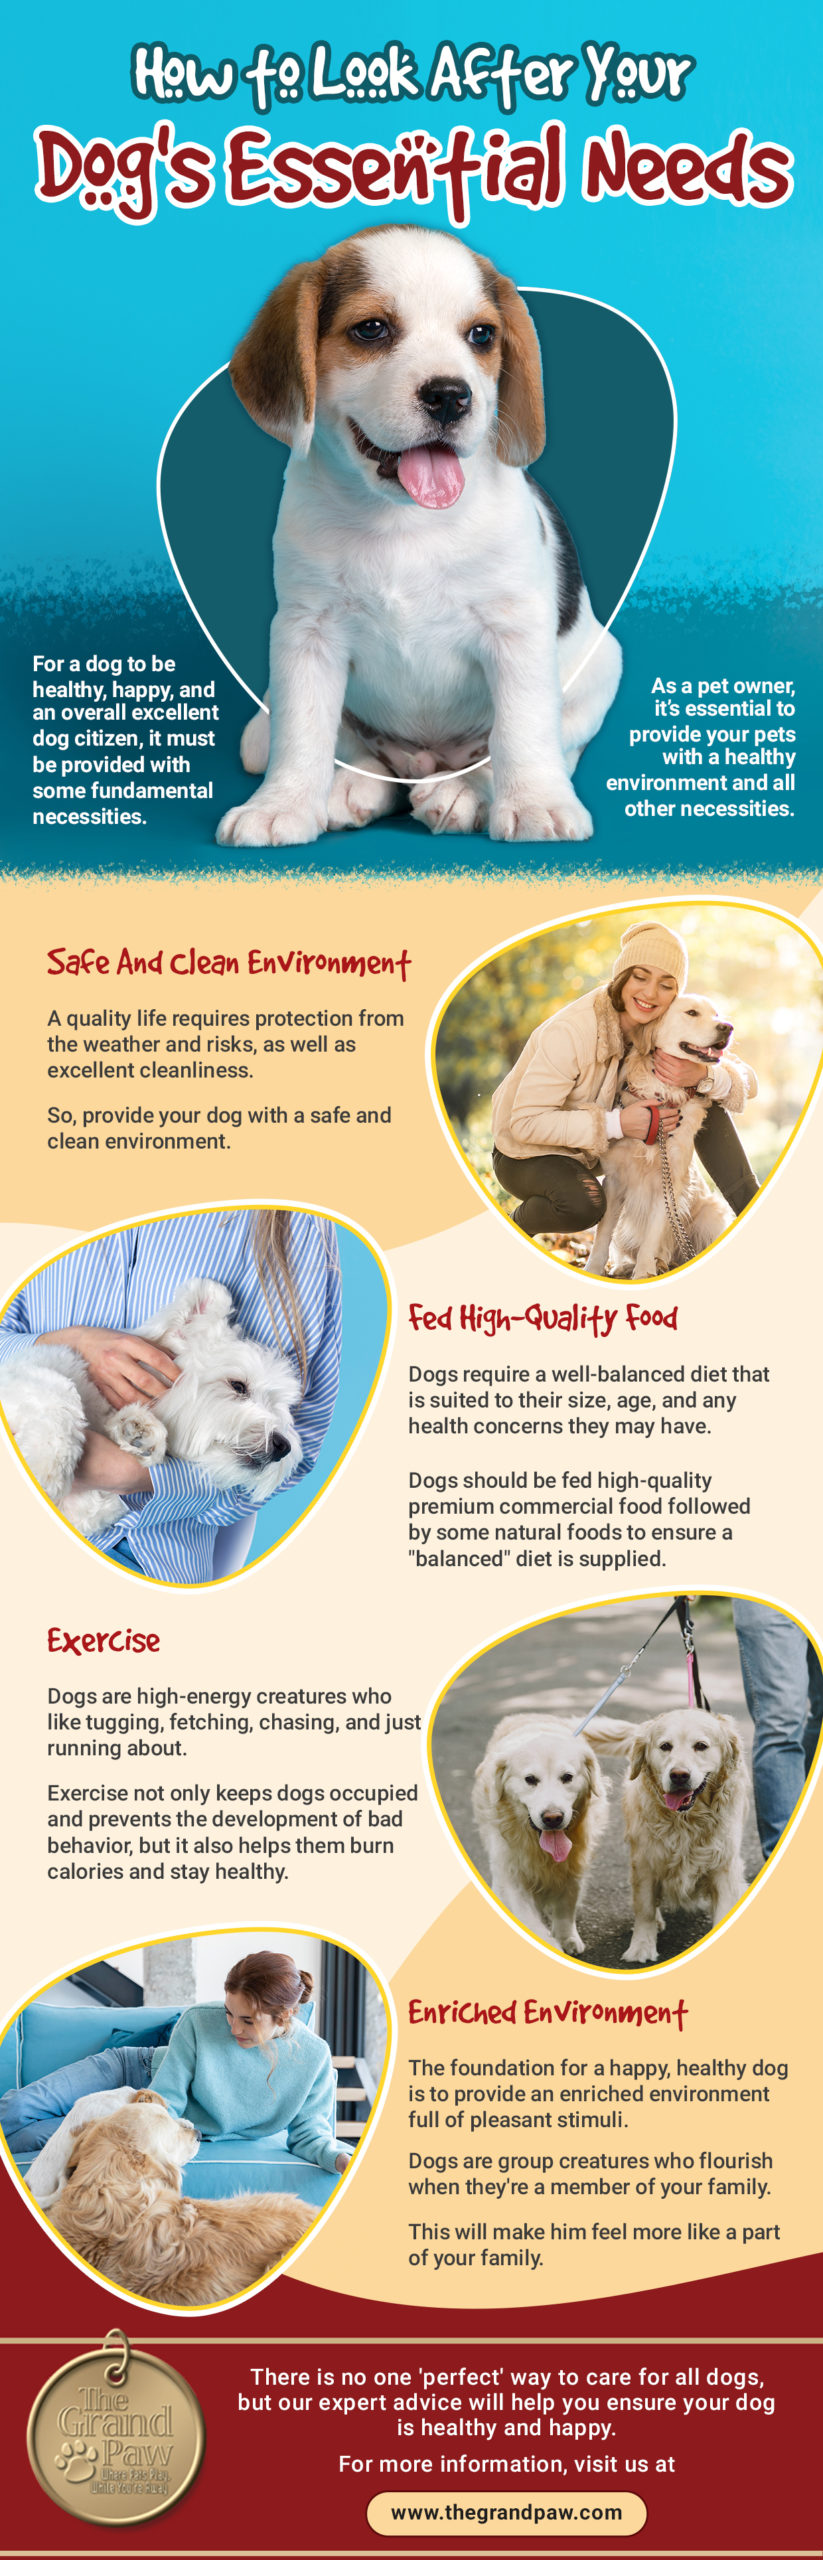 how to look after your dog's essential needs